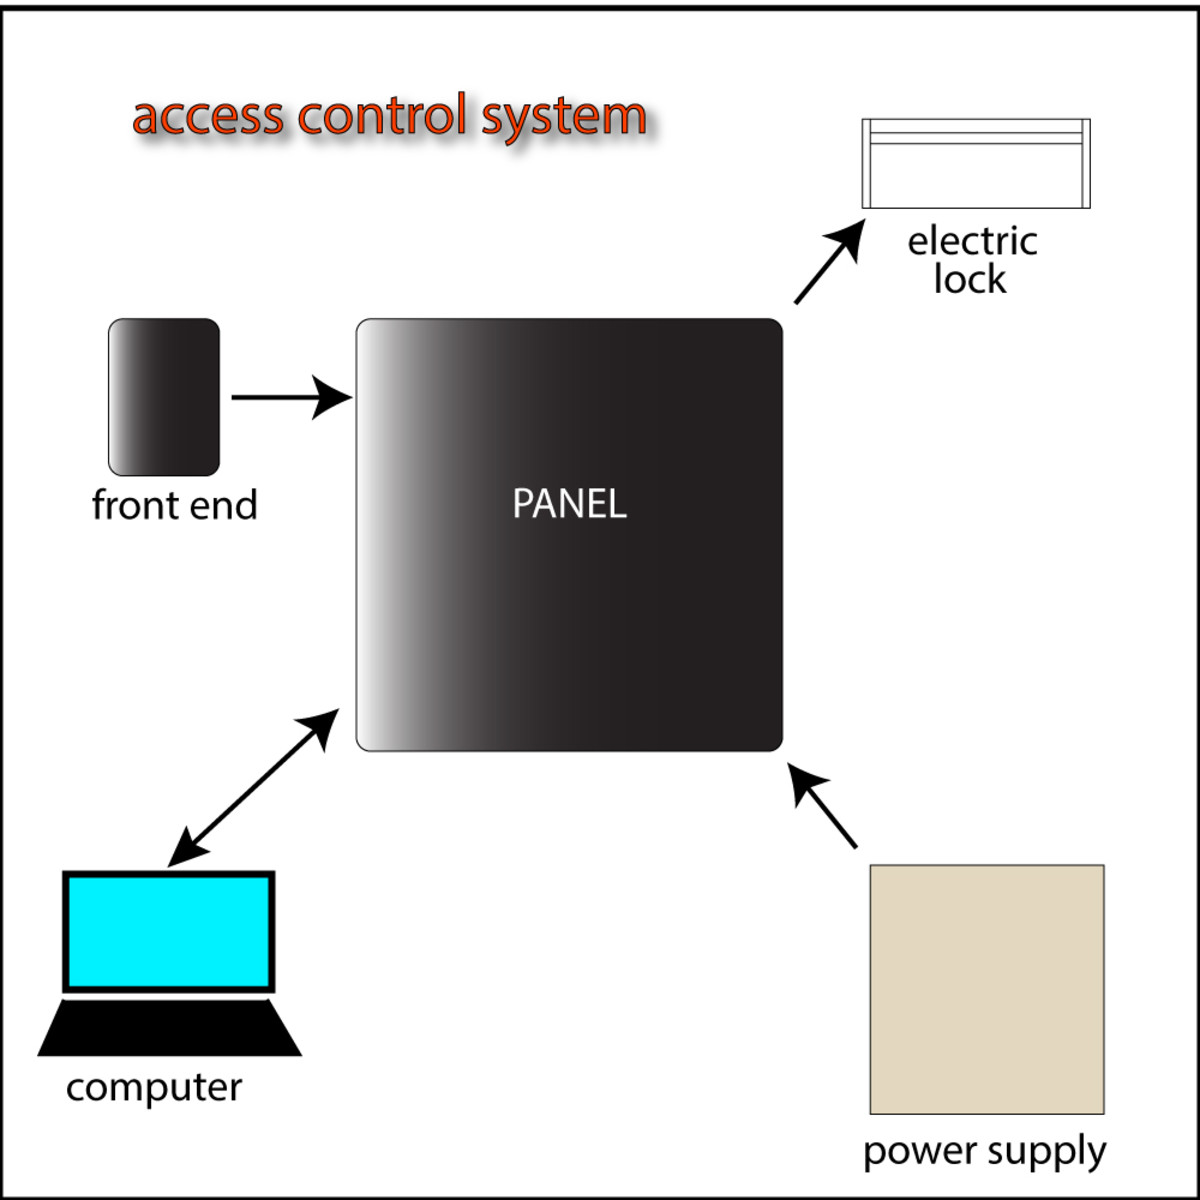 Components of an access control system